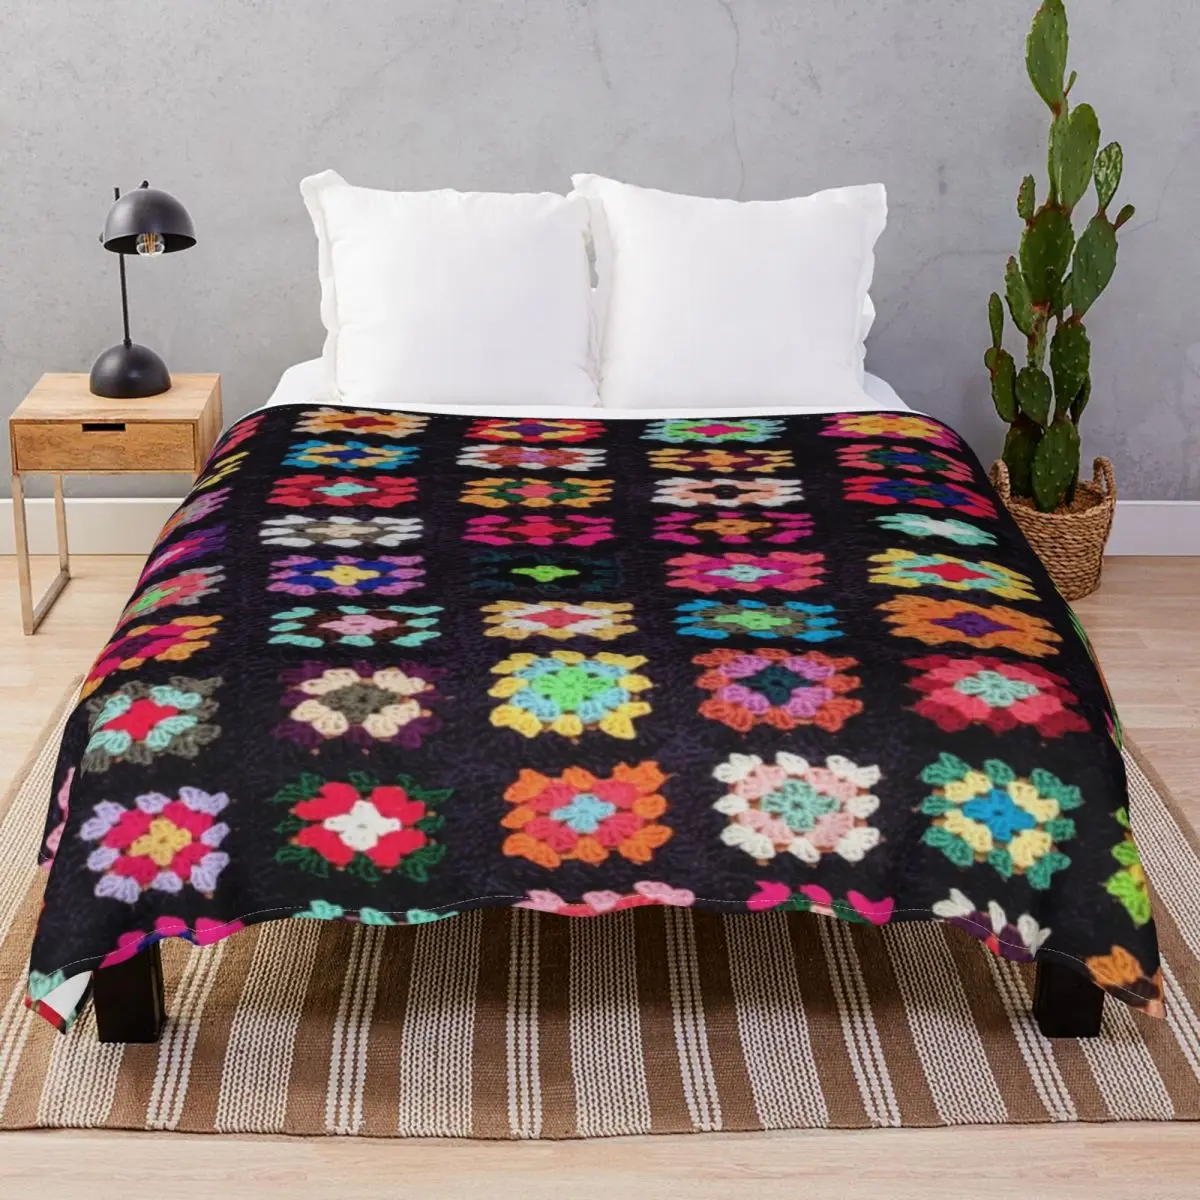 Roseanne Blanket Blankets Flannel Spring/Autumn Multi-function Throw Blanket for Bedding Home Couch Camp Office